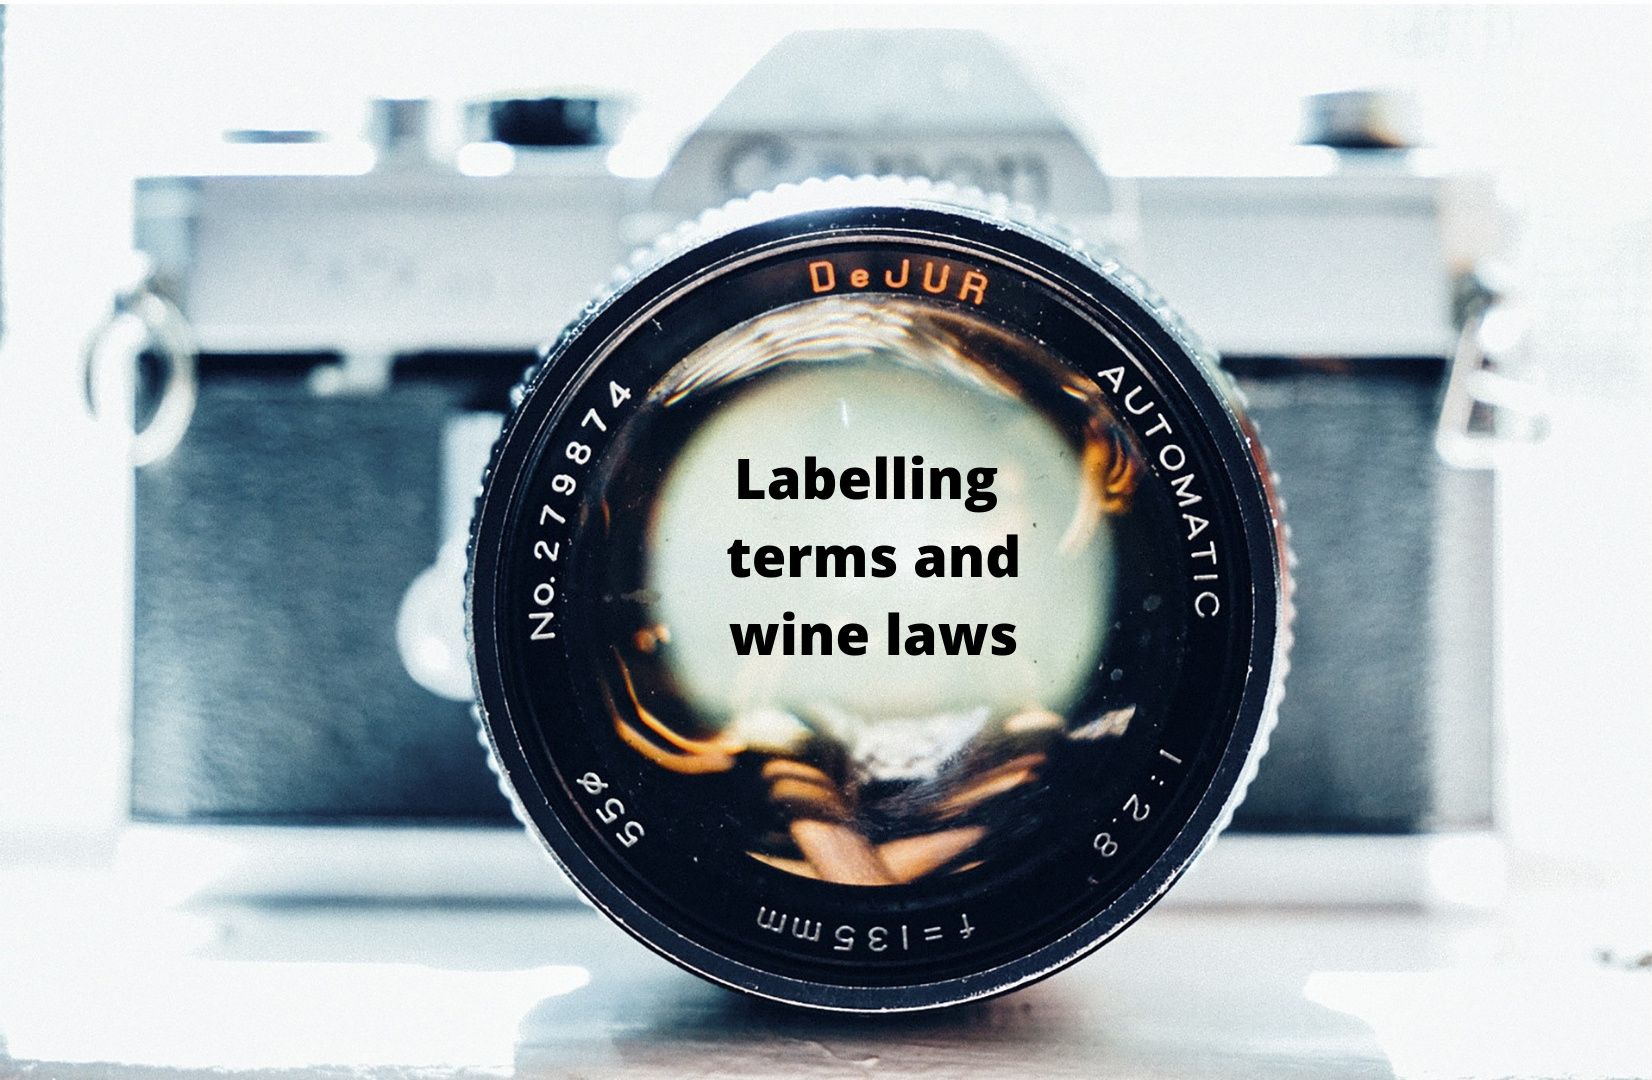 Camera lens with text